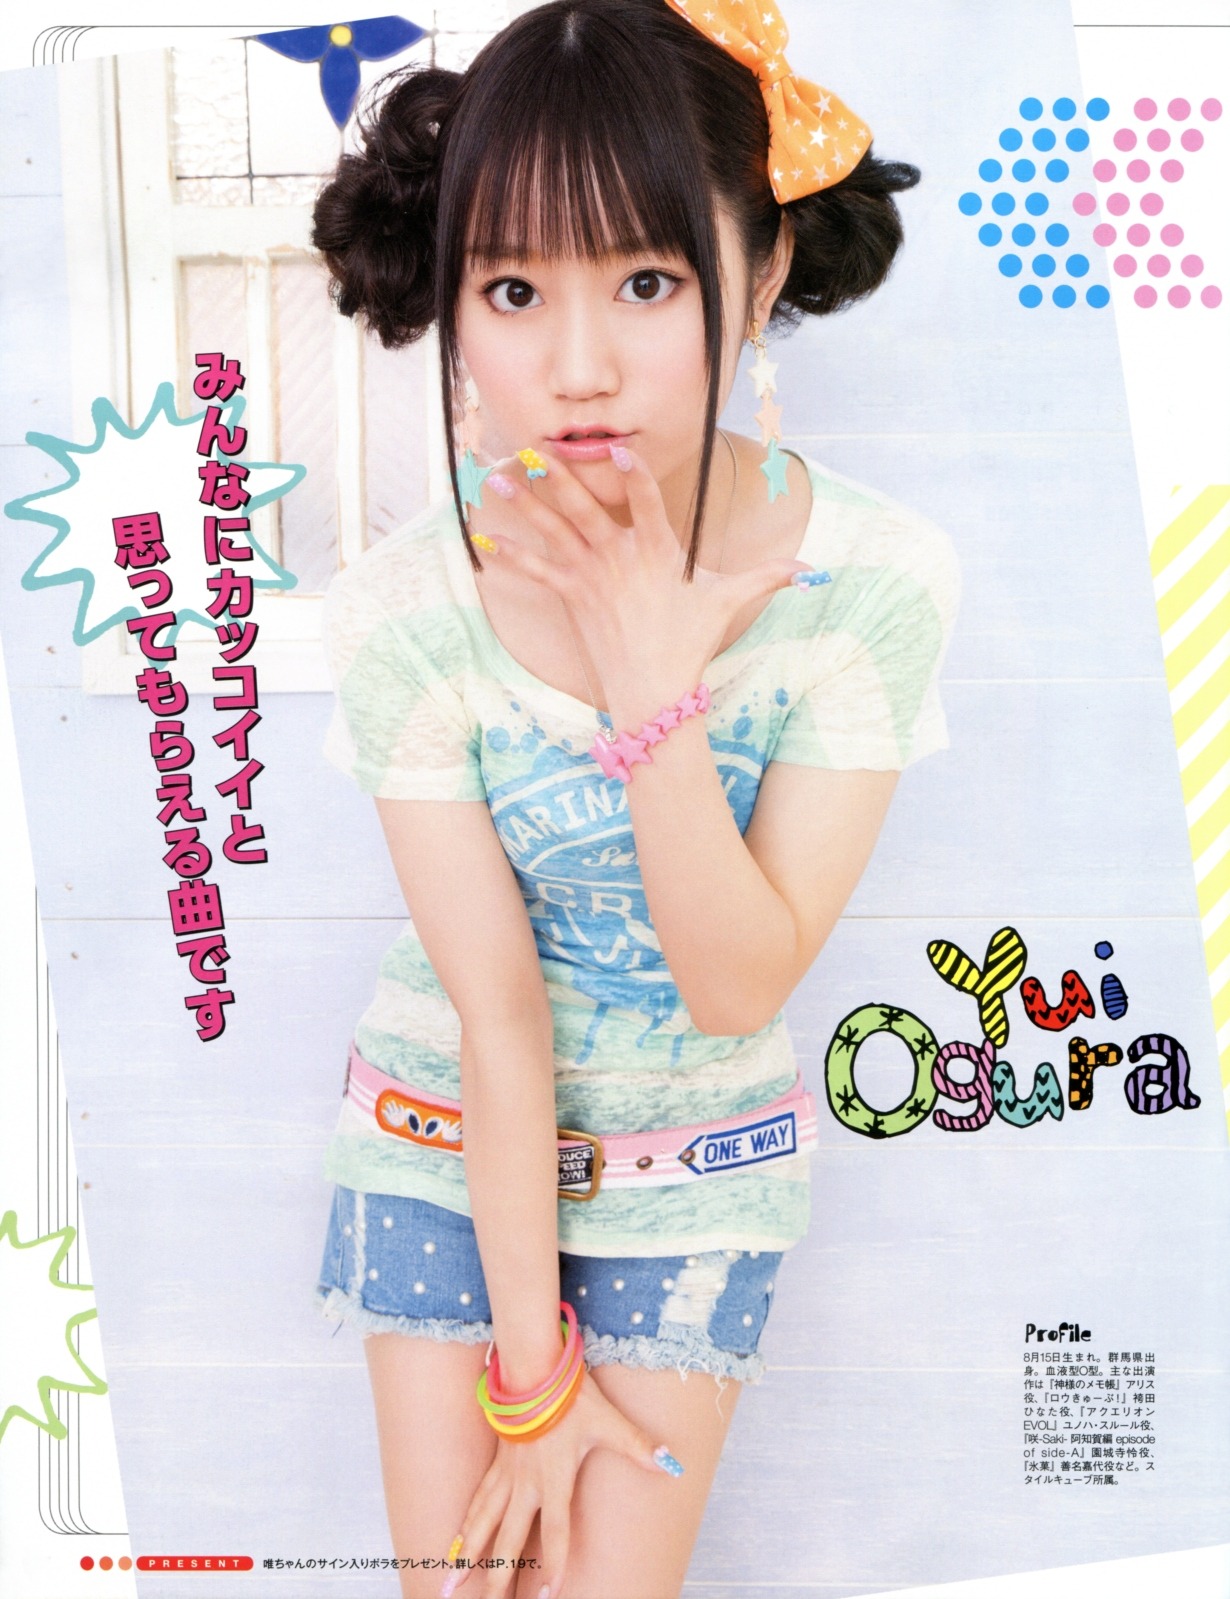 Ogura Yui 小倉唯 Page 6 Official Members Thread Hello Online Page 6